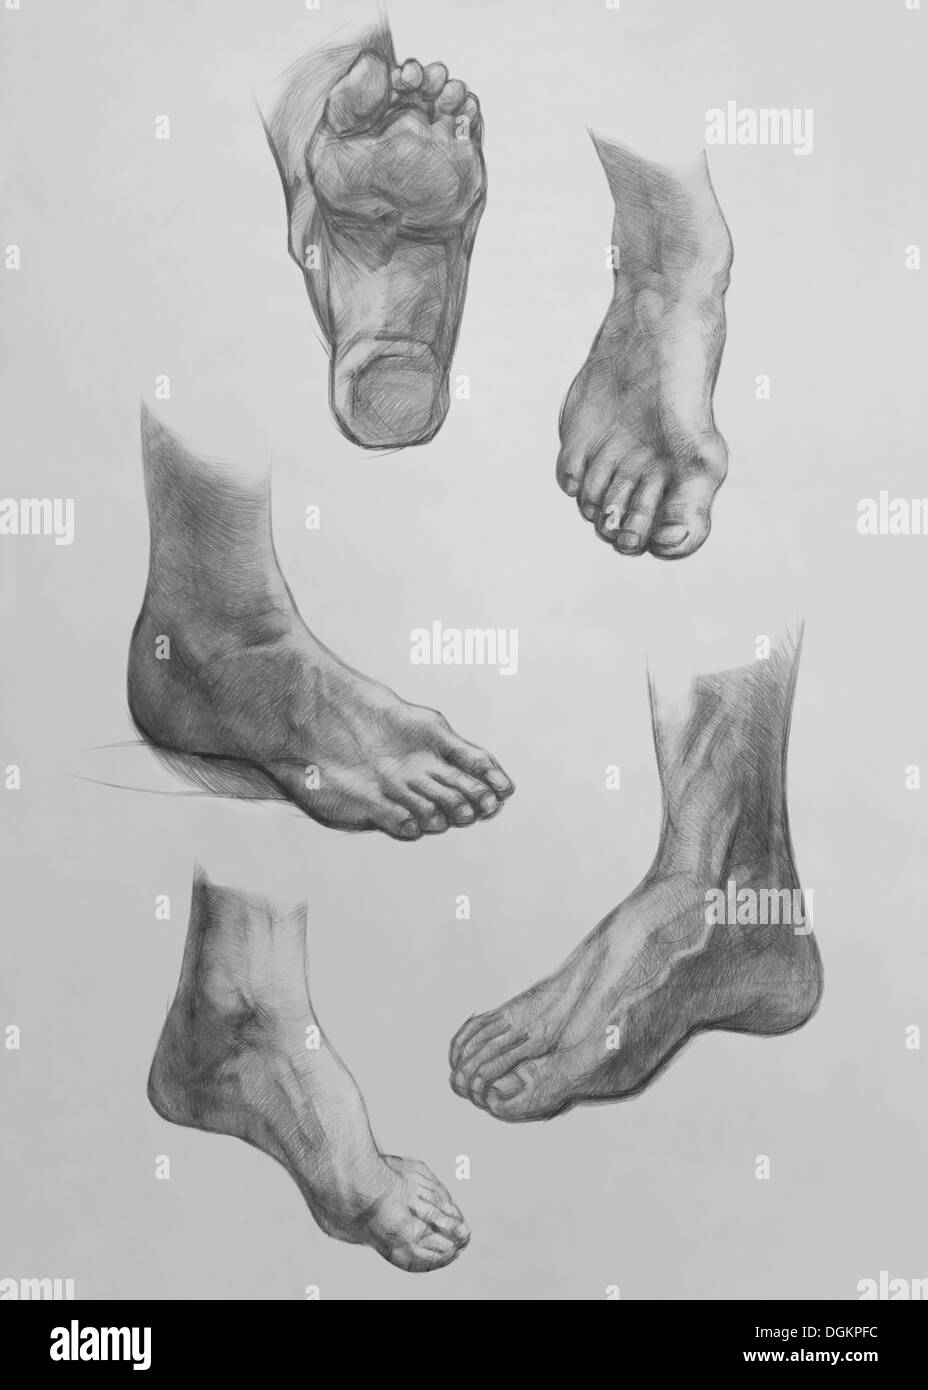 Show of Feet. It is a Pencil Drawing Stock Photo